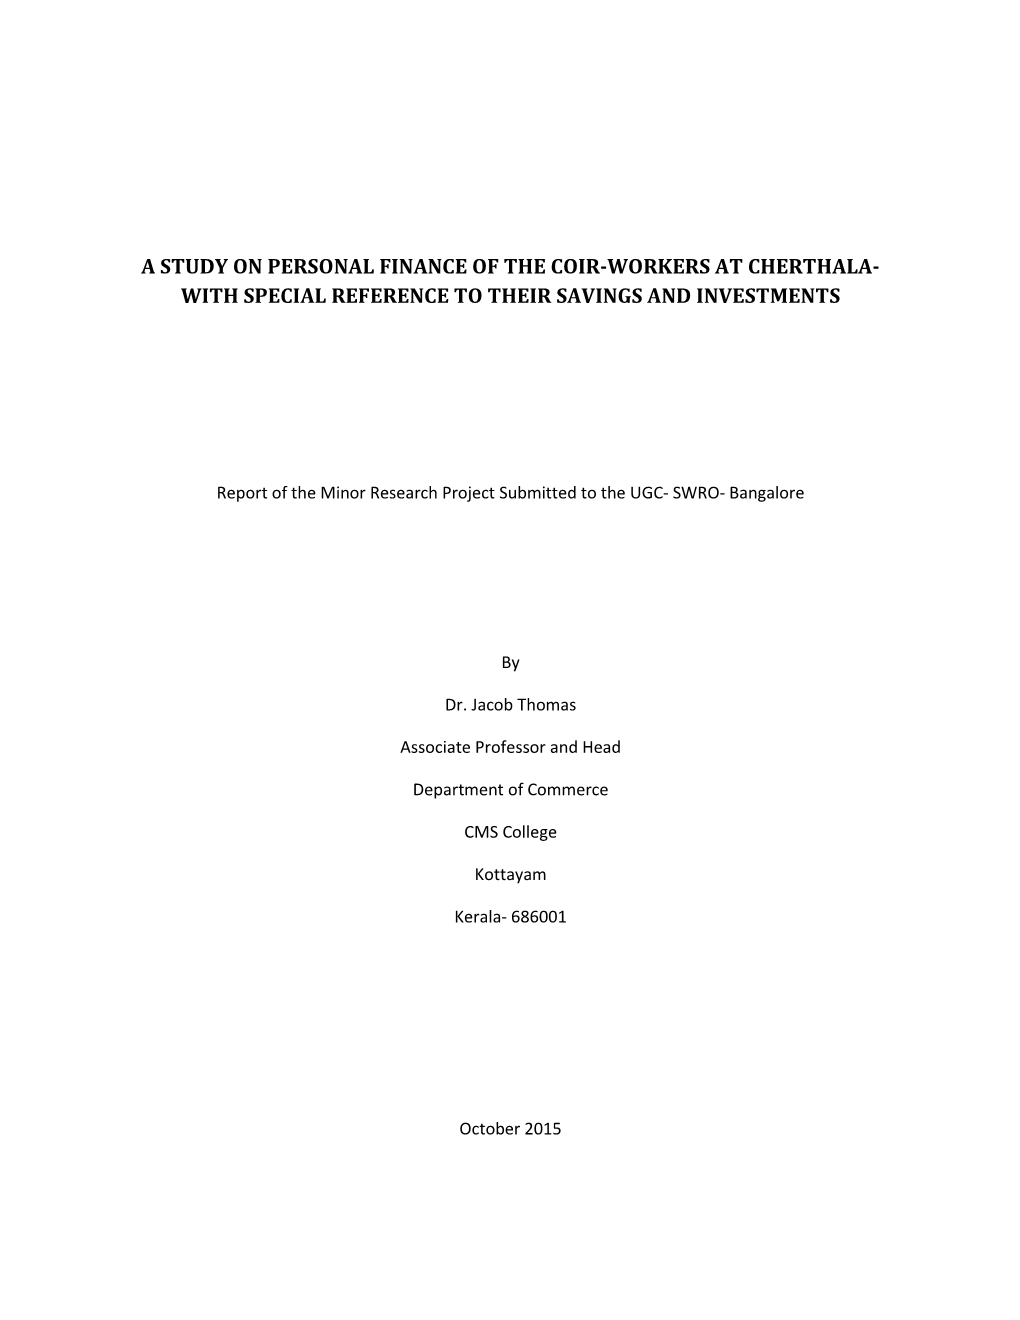 A Study on Personal Finance of the Coir-Workers at Cherthala- with Special Reference to Their Savings and Investments